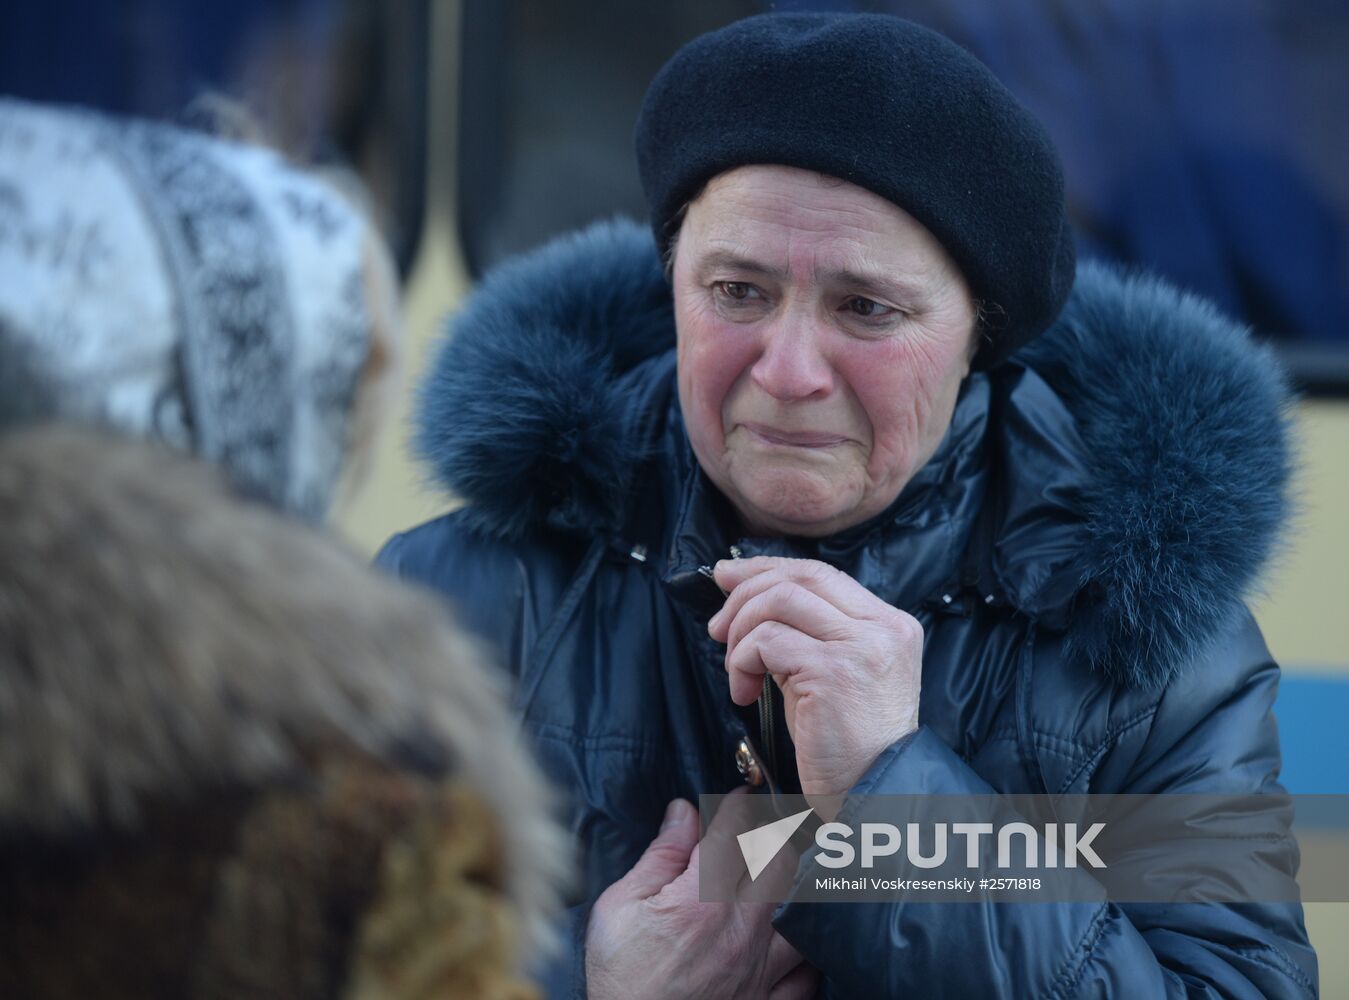 Four buses carry refugees from Donetsk to Russia